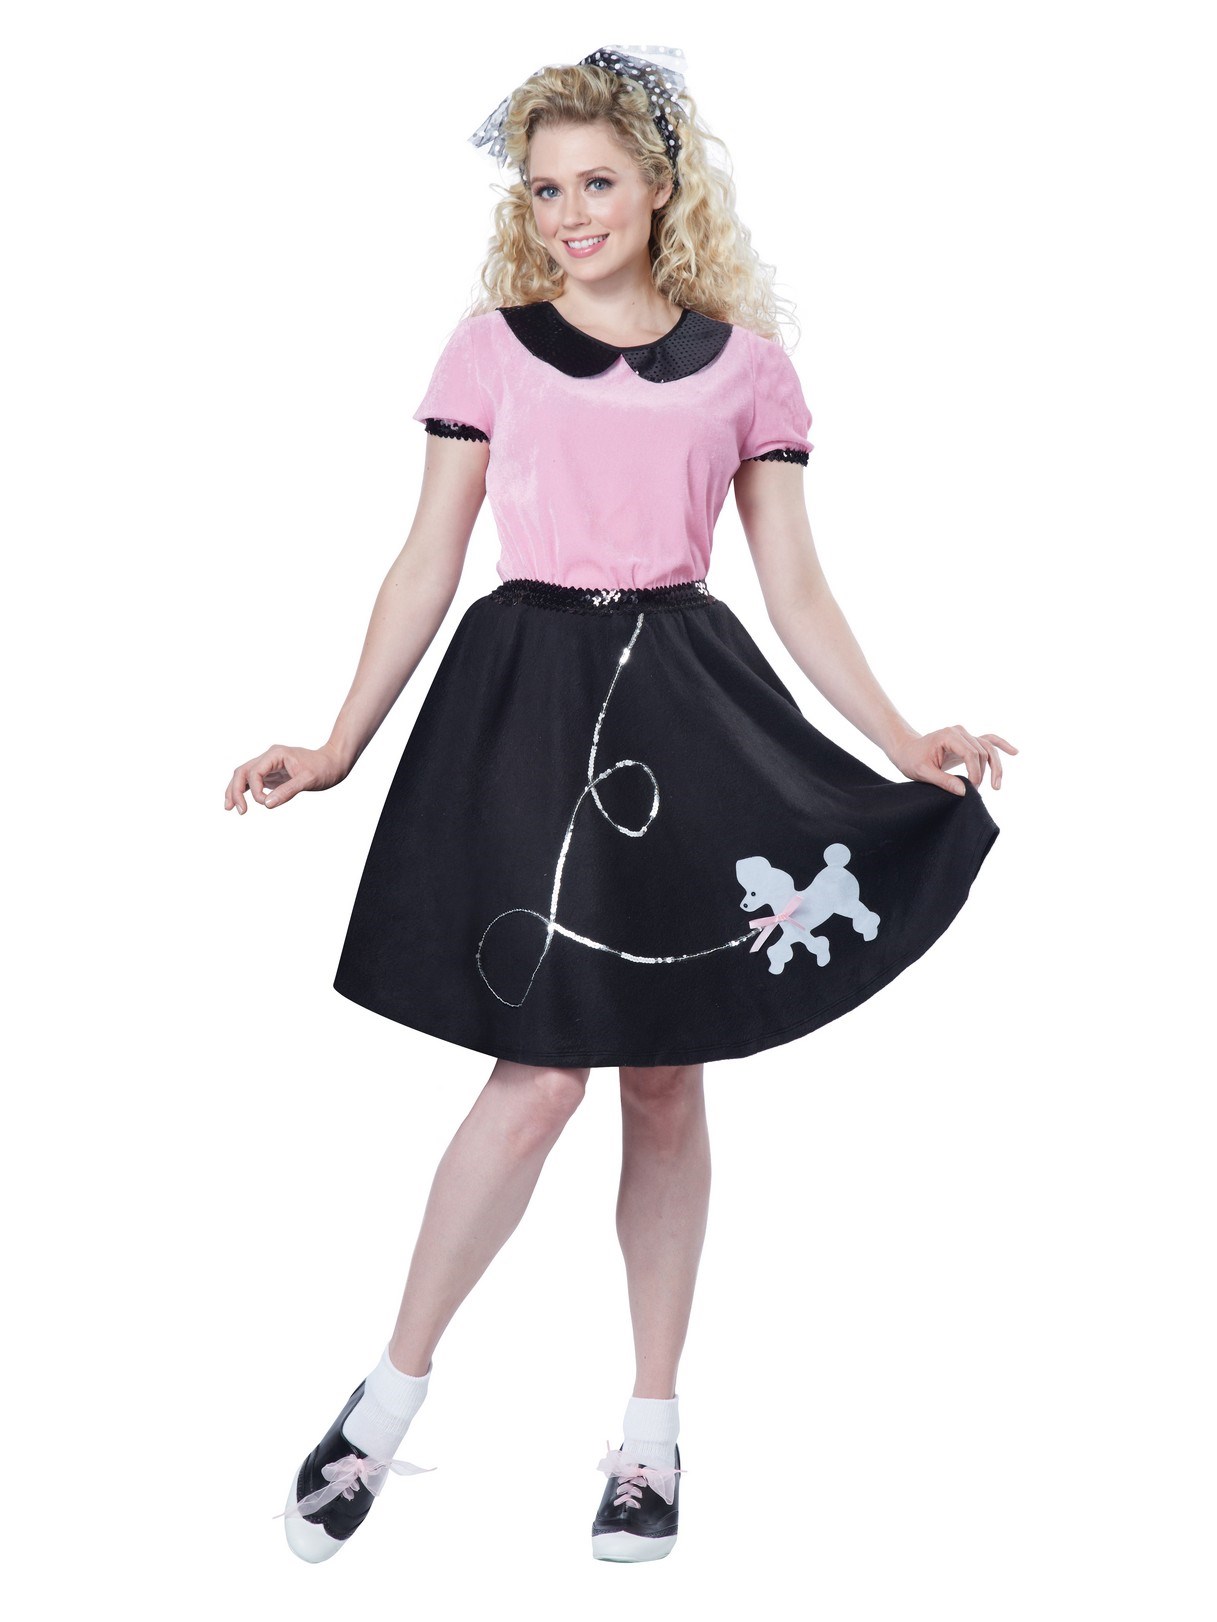 50s Hop With Poodle Skirt Adult Costume